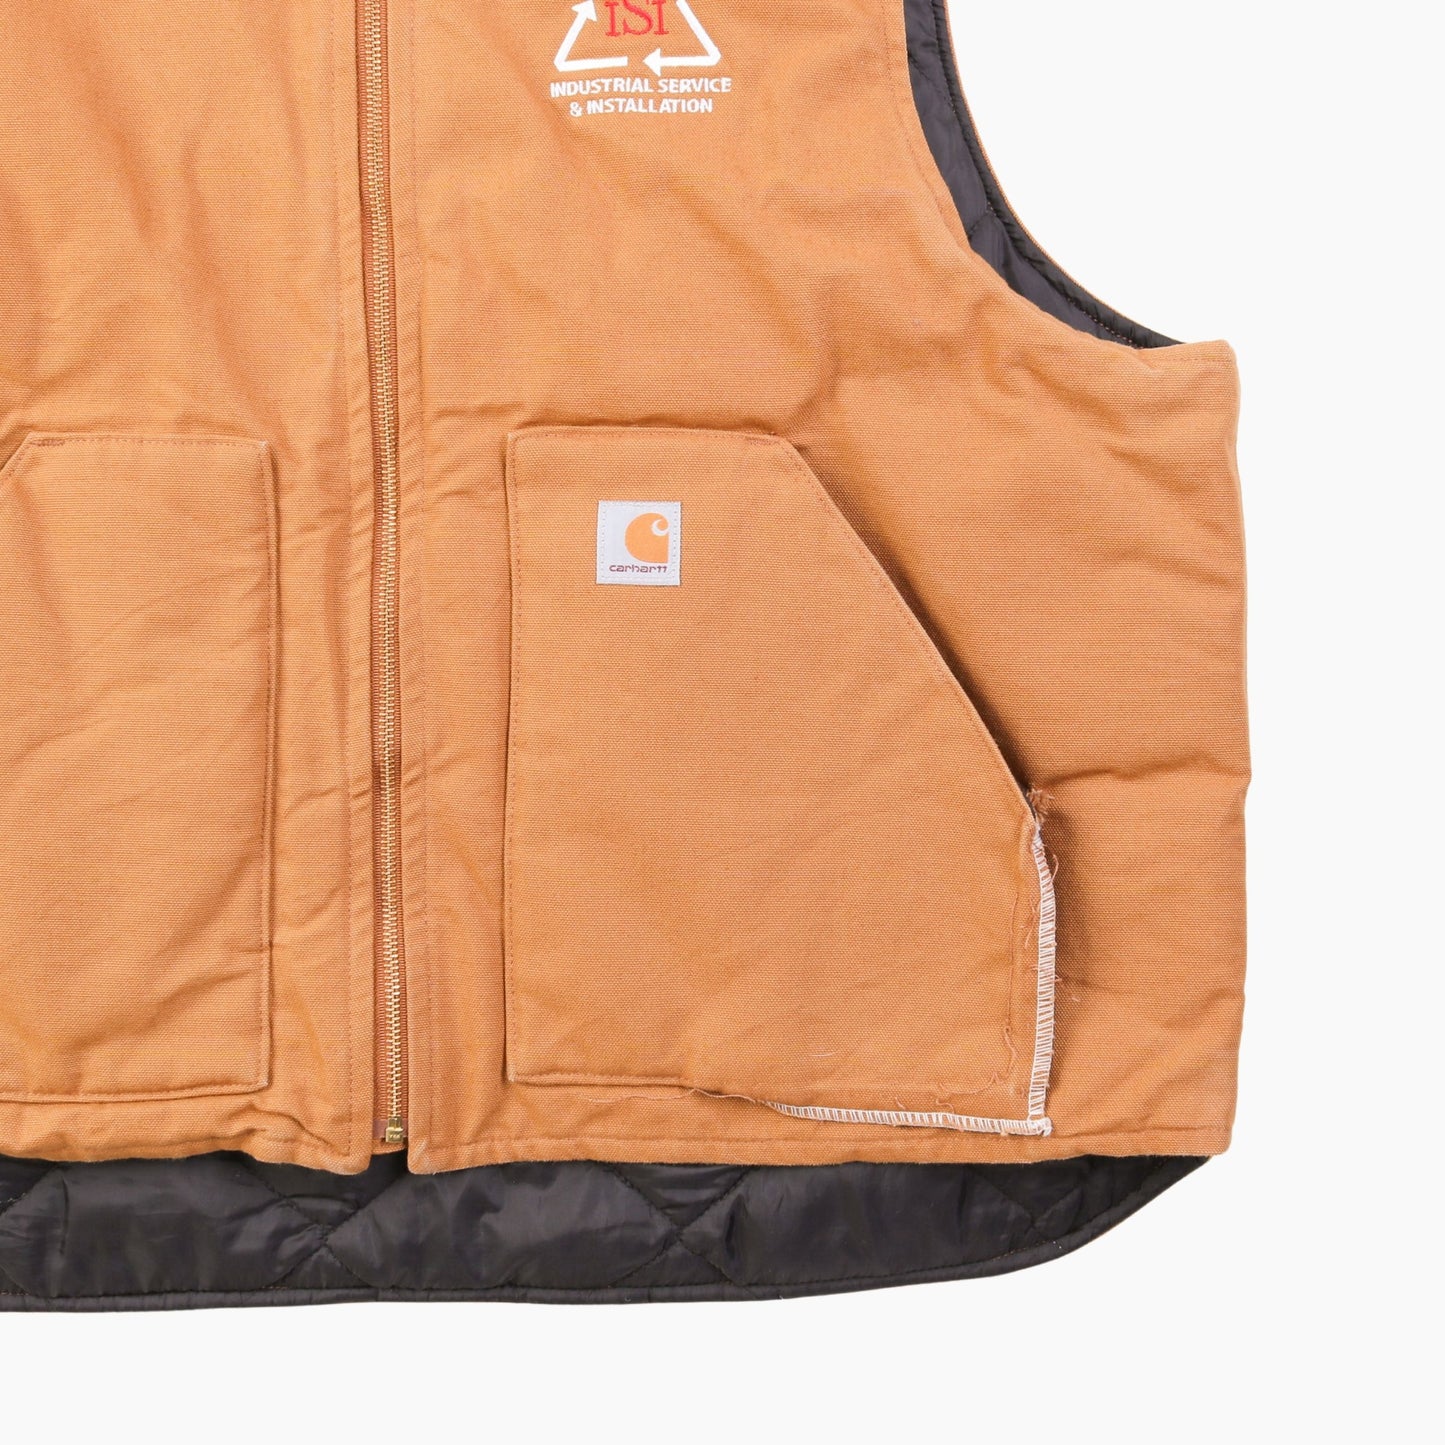 Lined Vest - Hamilton Brown - American Madness